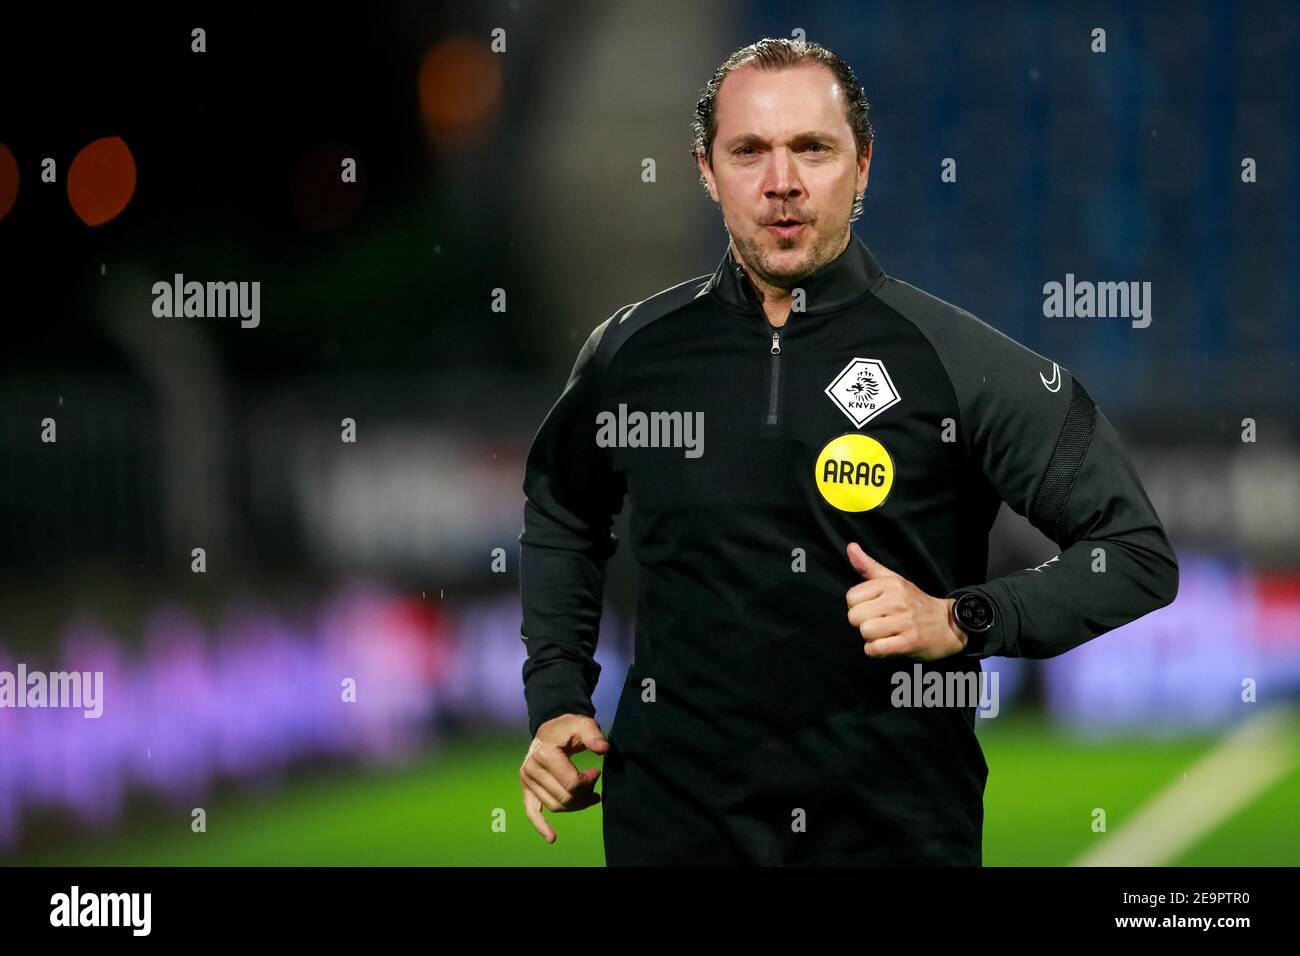 EINDHOVEN, NETHERLANDS - FEBRUARY 5: (L-R): Assistant Referee Rob van de Ven during the Dutch Keukenkampioendivisie match between FC Eindhoven and Go Stock Photo